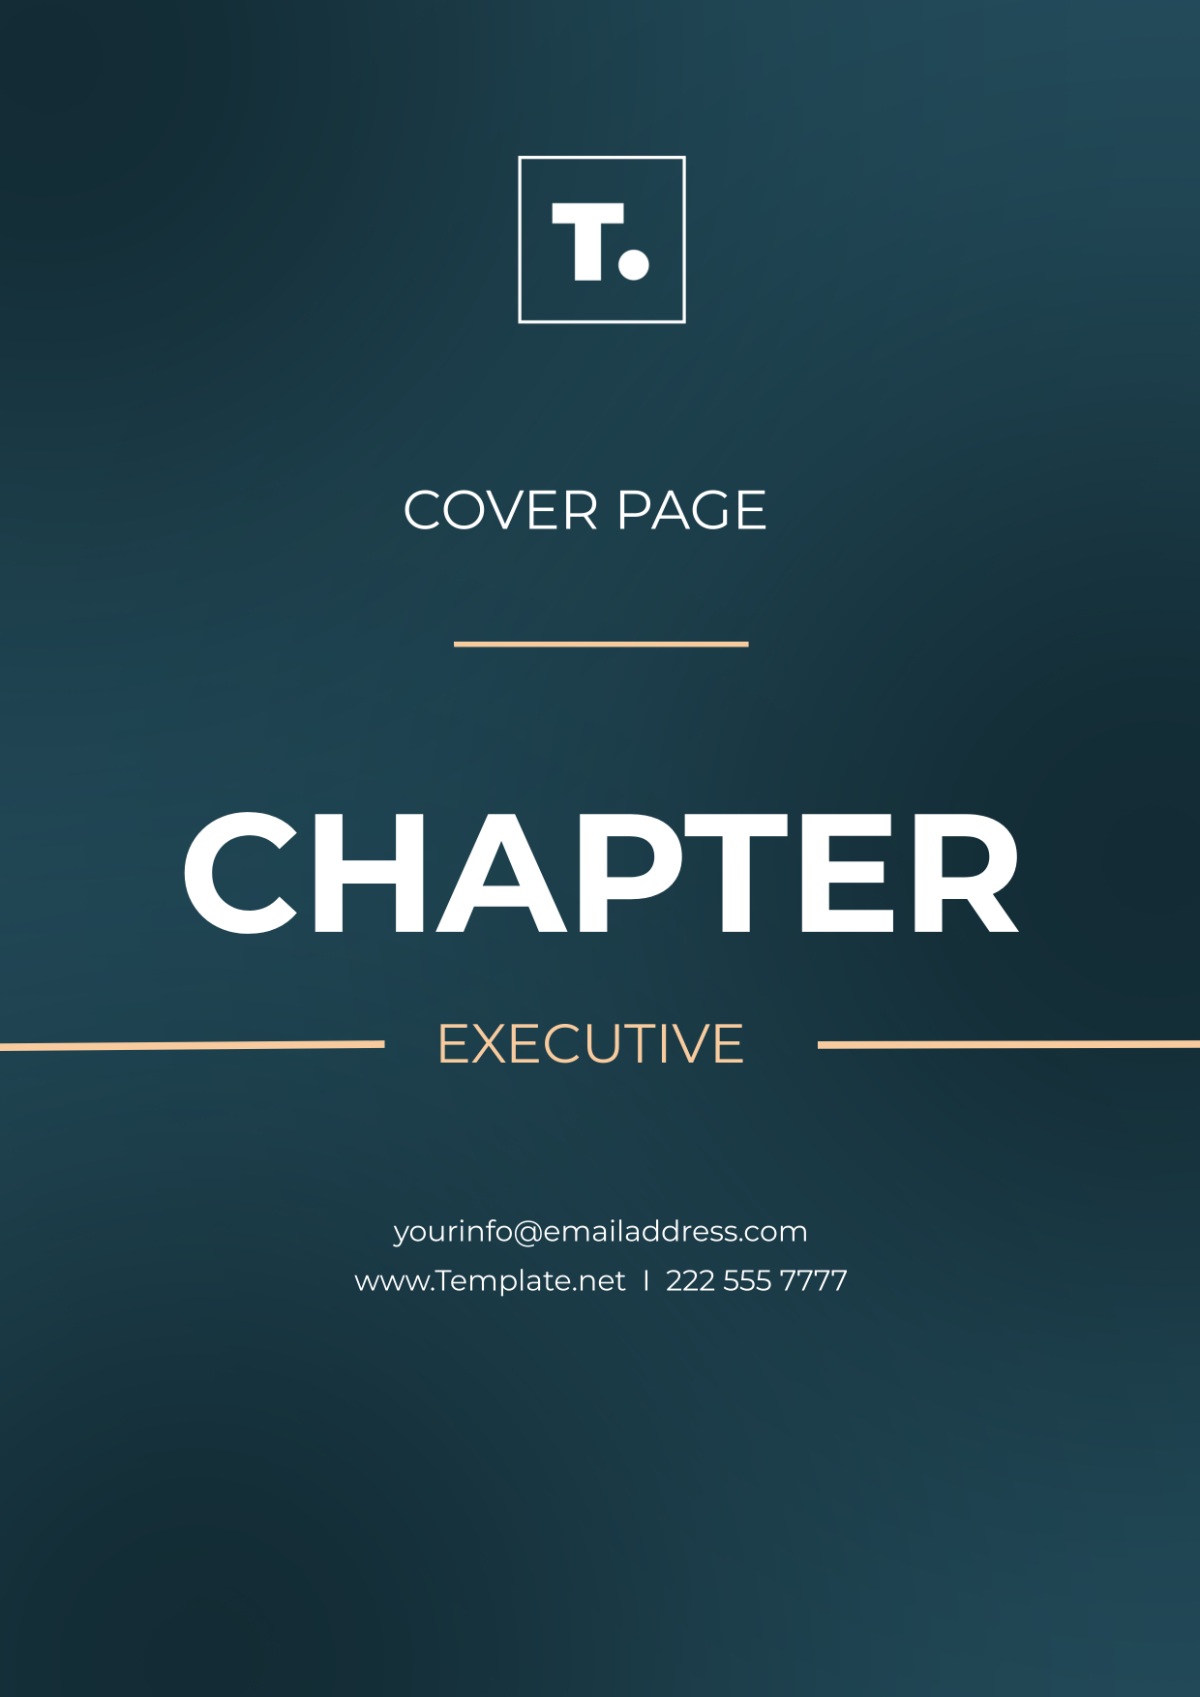 Chapter Executive Cover Page